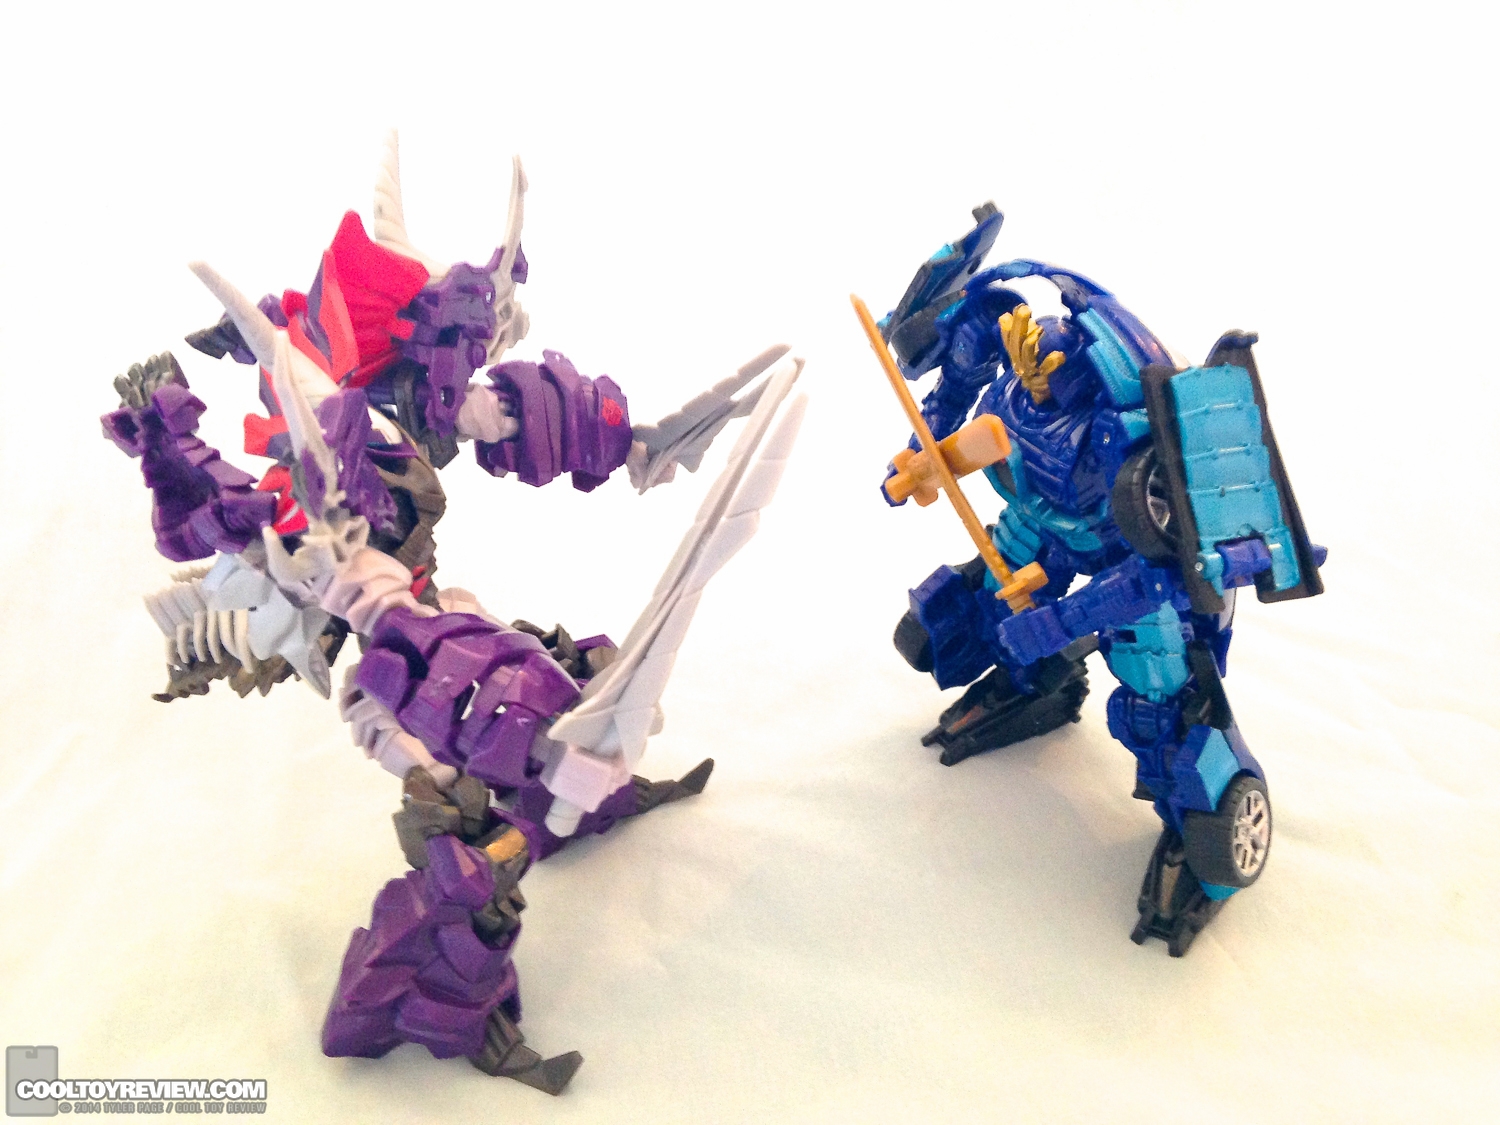 Transformers-Age-of-Extinction-Hasbro-Action-Figures-Review-010.jpg